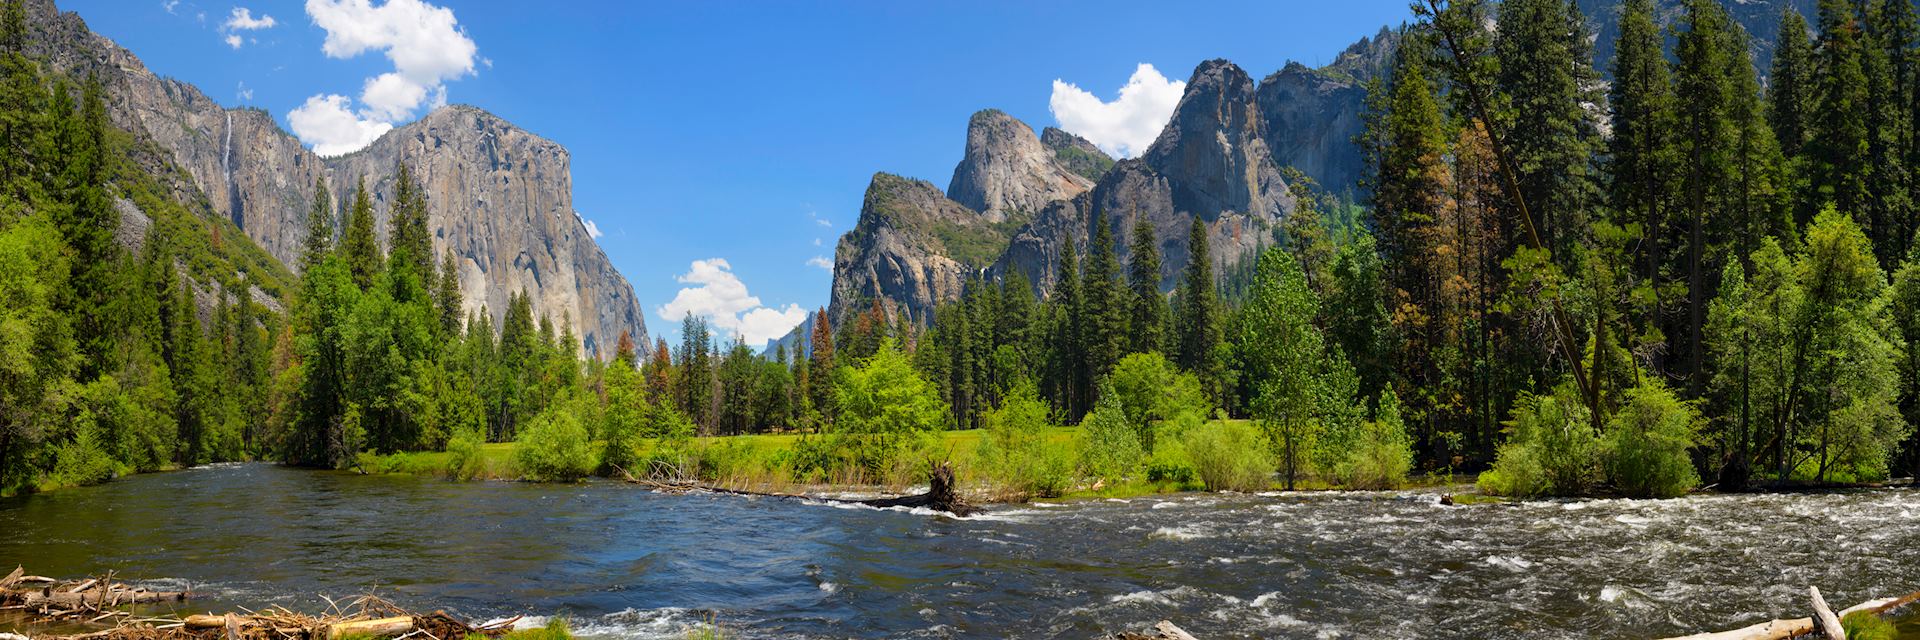 What To Do In Yosemite National Park Our Highlights Guide Audley Travel